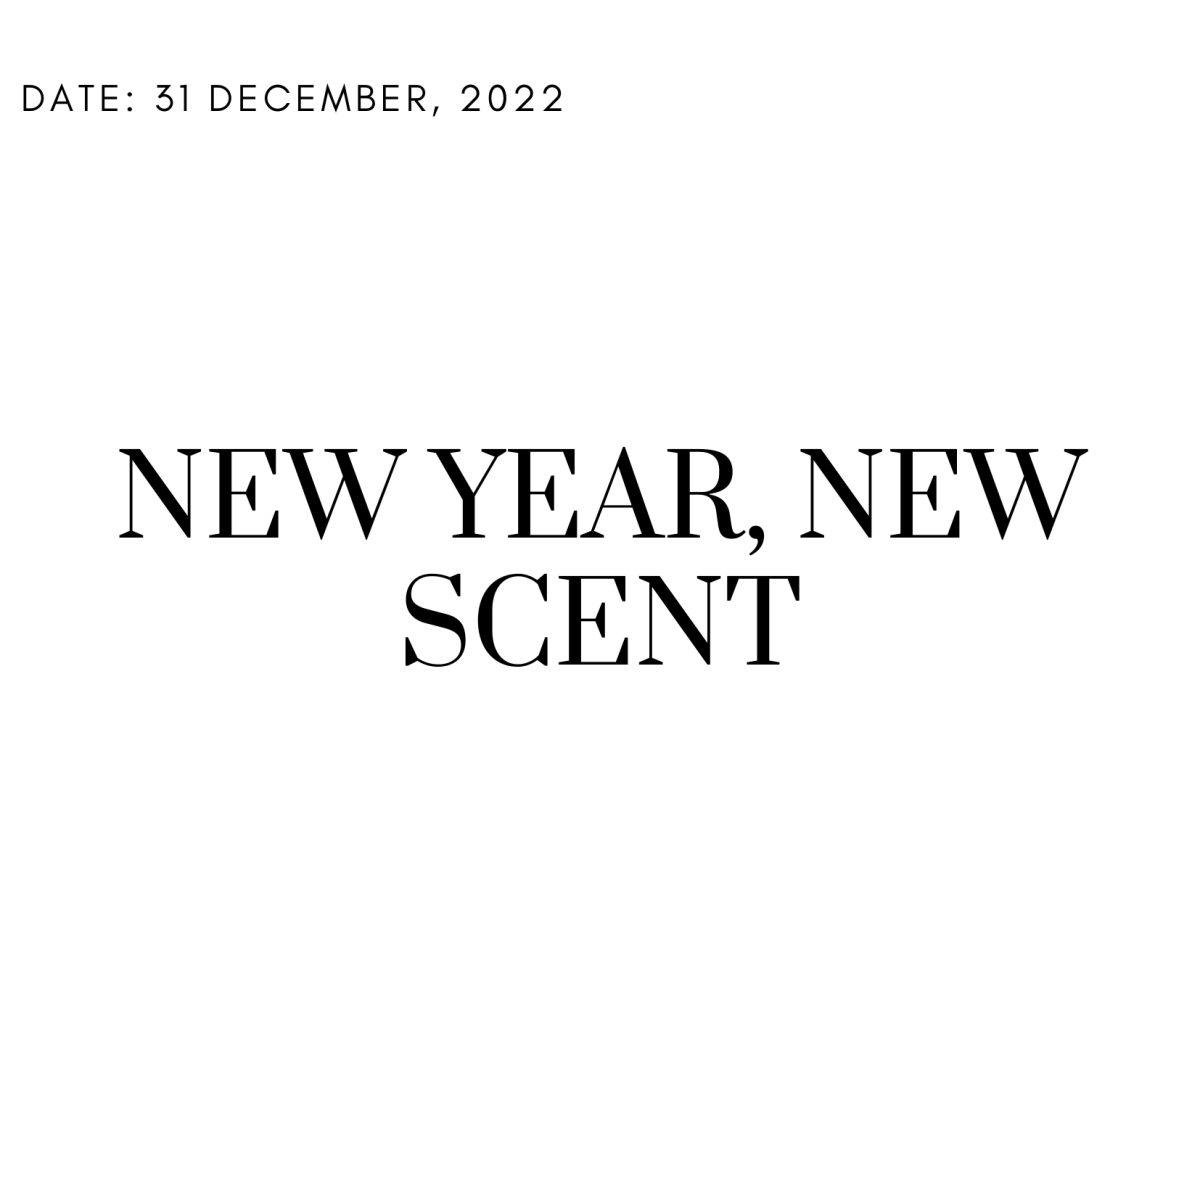 New Year, New Scent